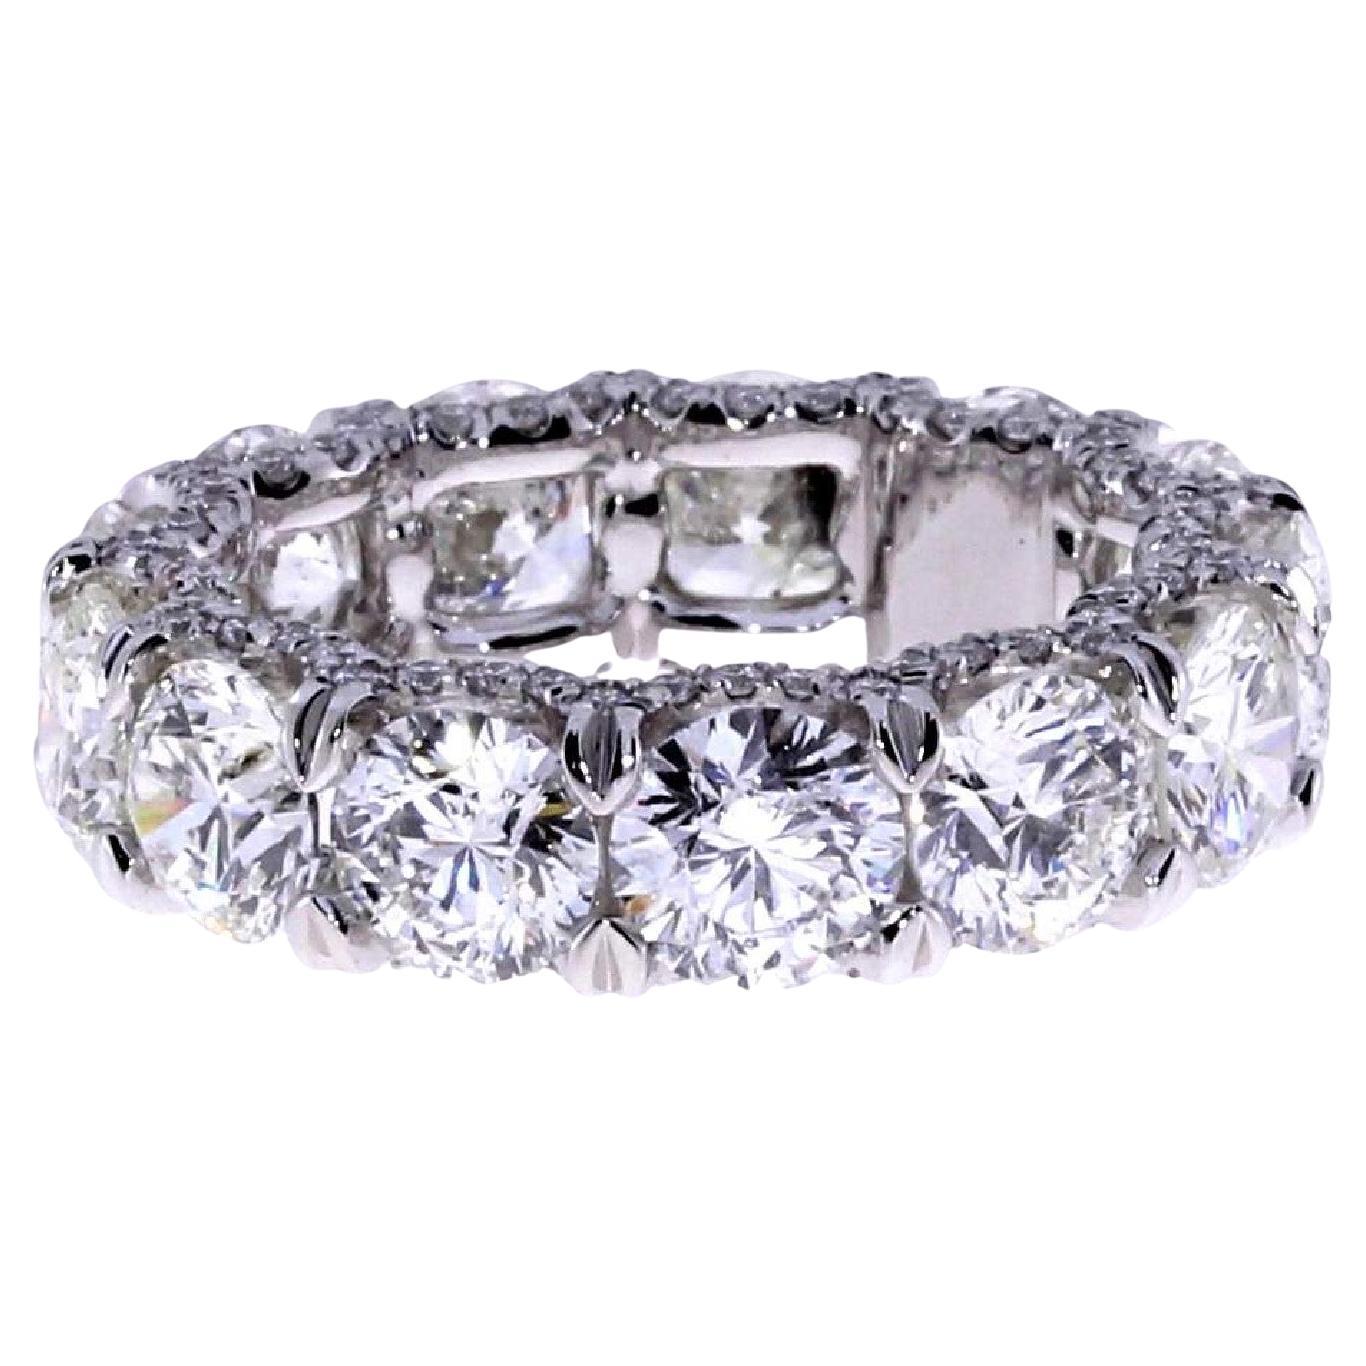 8.21ct Round Diamond Eternity Band With Hidden Halo For Sale